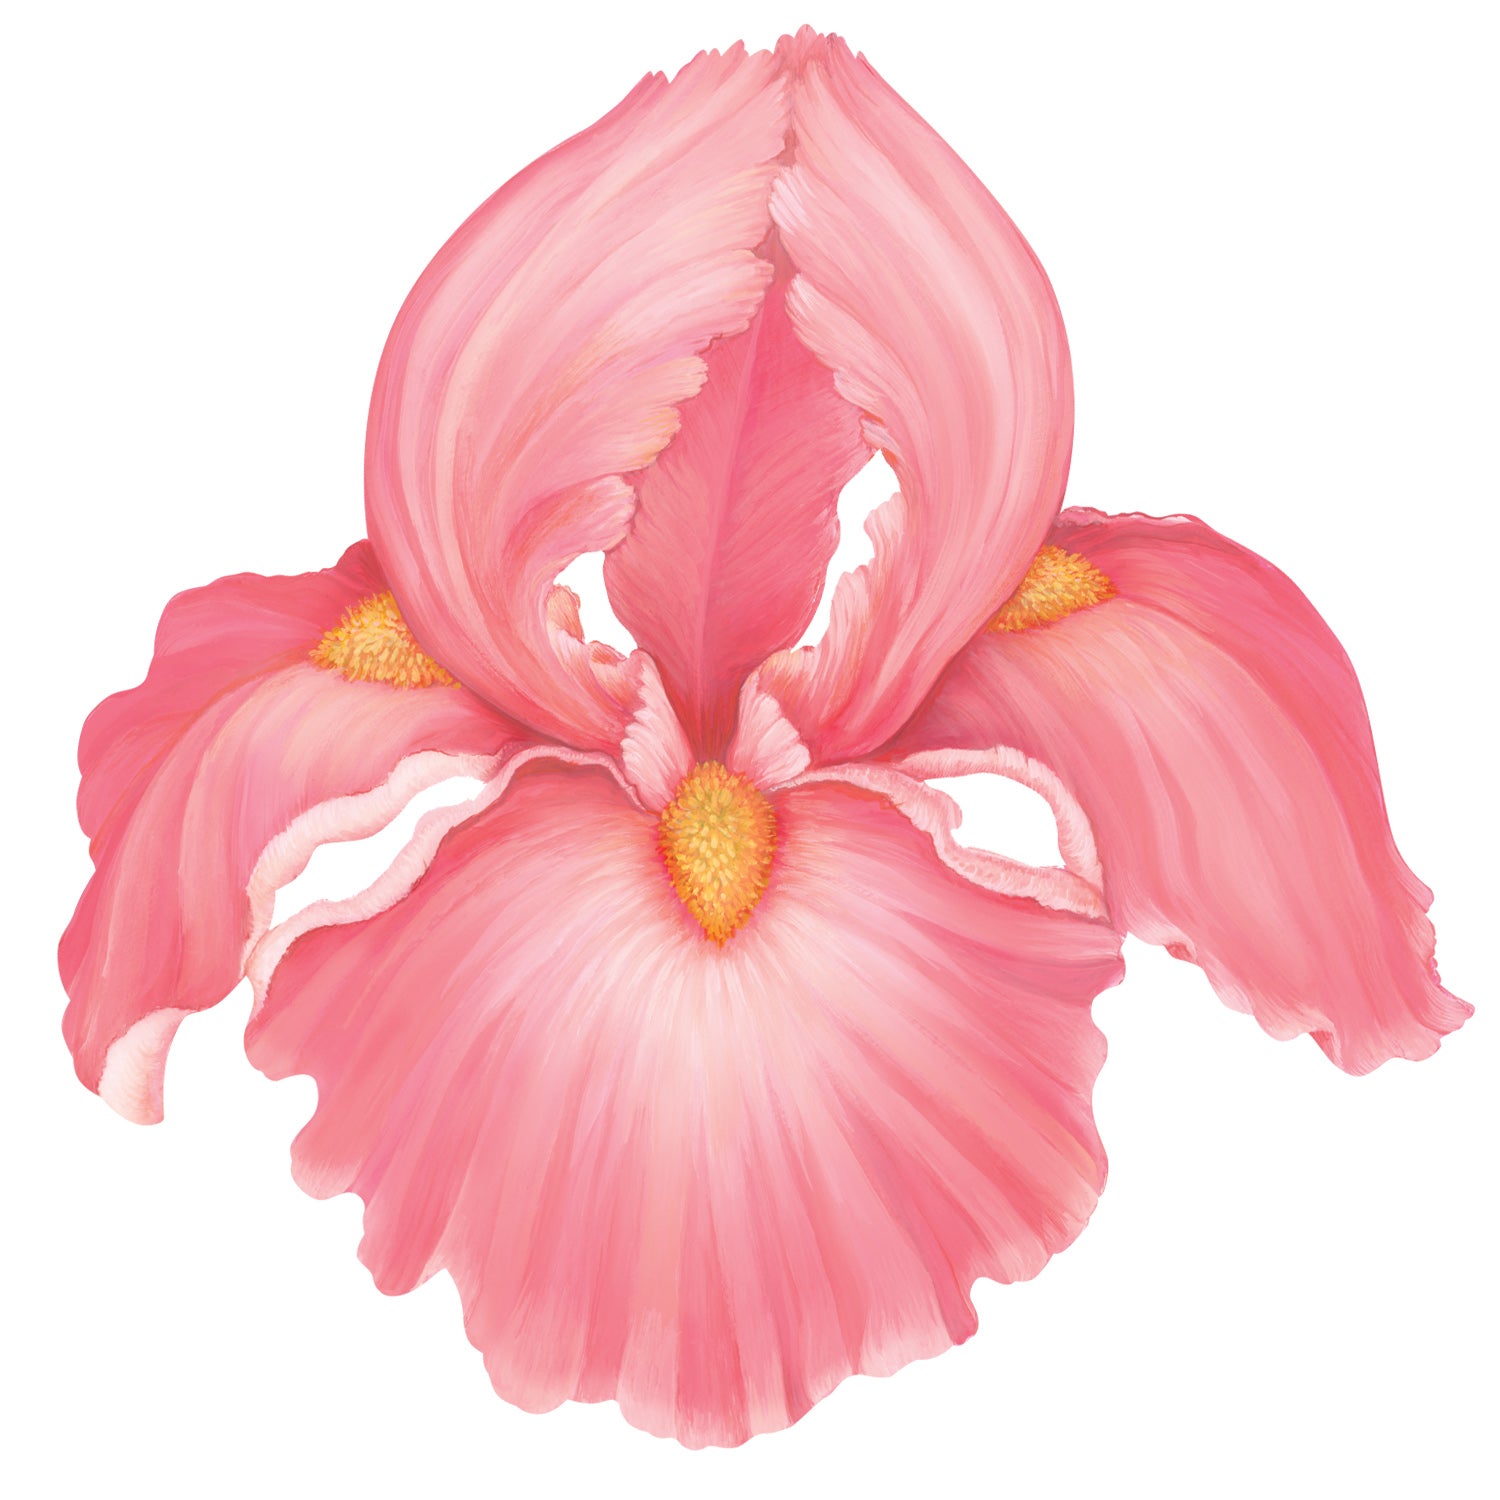 A die-cut illustrated iris bloom, in soft pink with a yellow center.